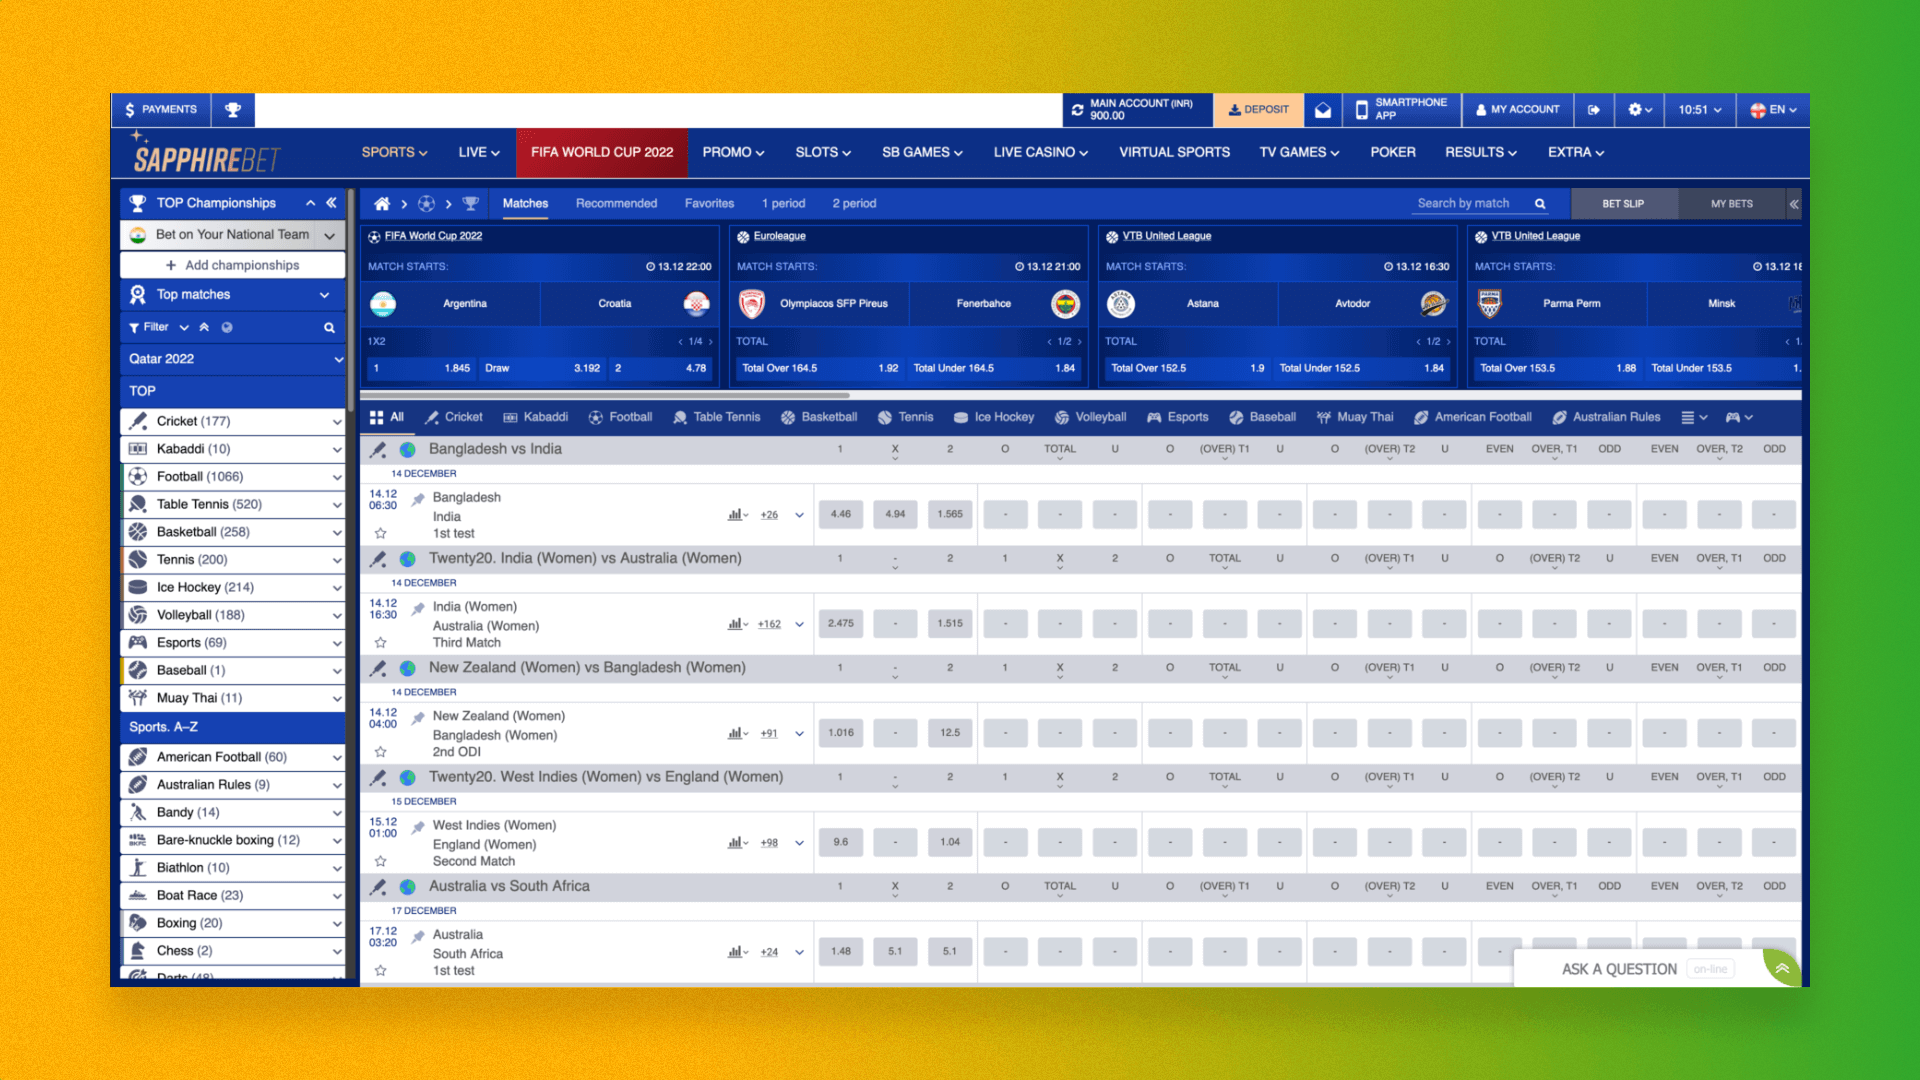 Go to the Sports section of the Sapphirebet website to select the sport you want to bet on